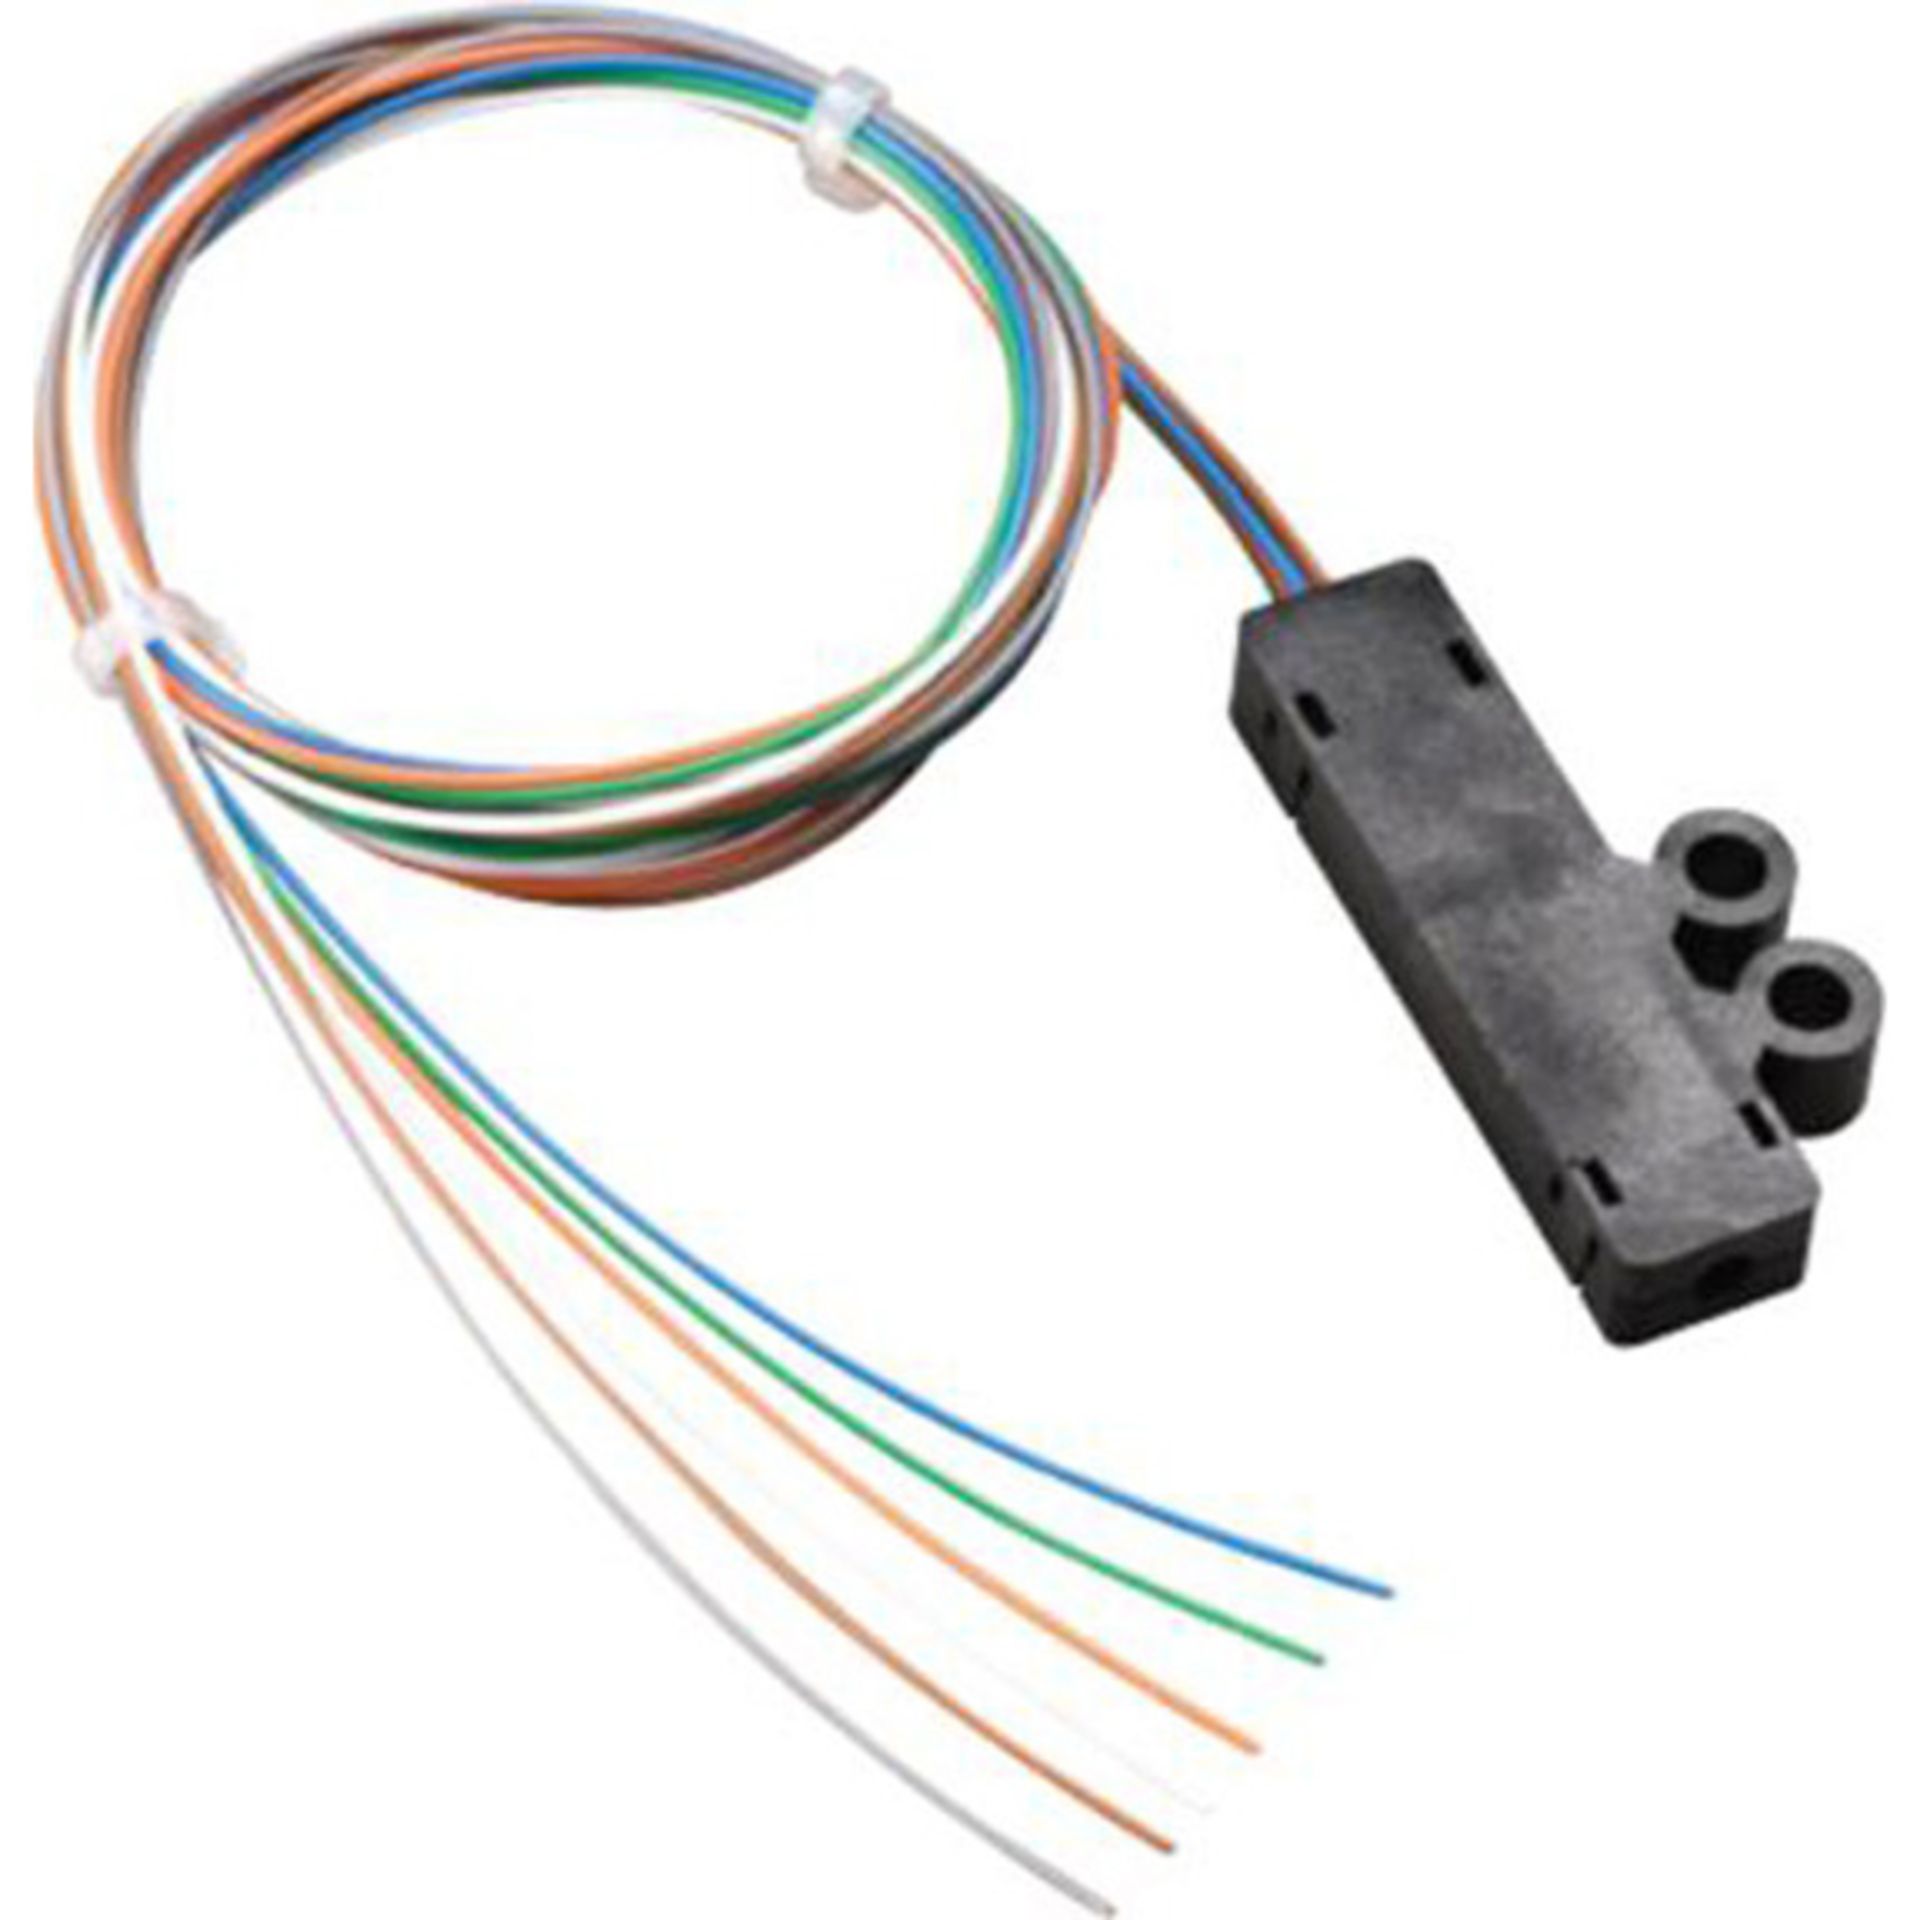 TOSLINK TO MINI PLUG Patch Cords and Fiber Fan Out Kits - Image 3 of 3